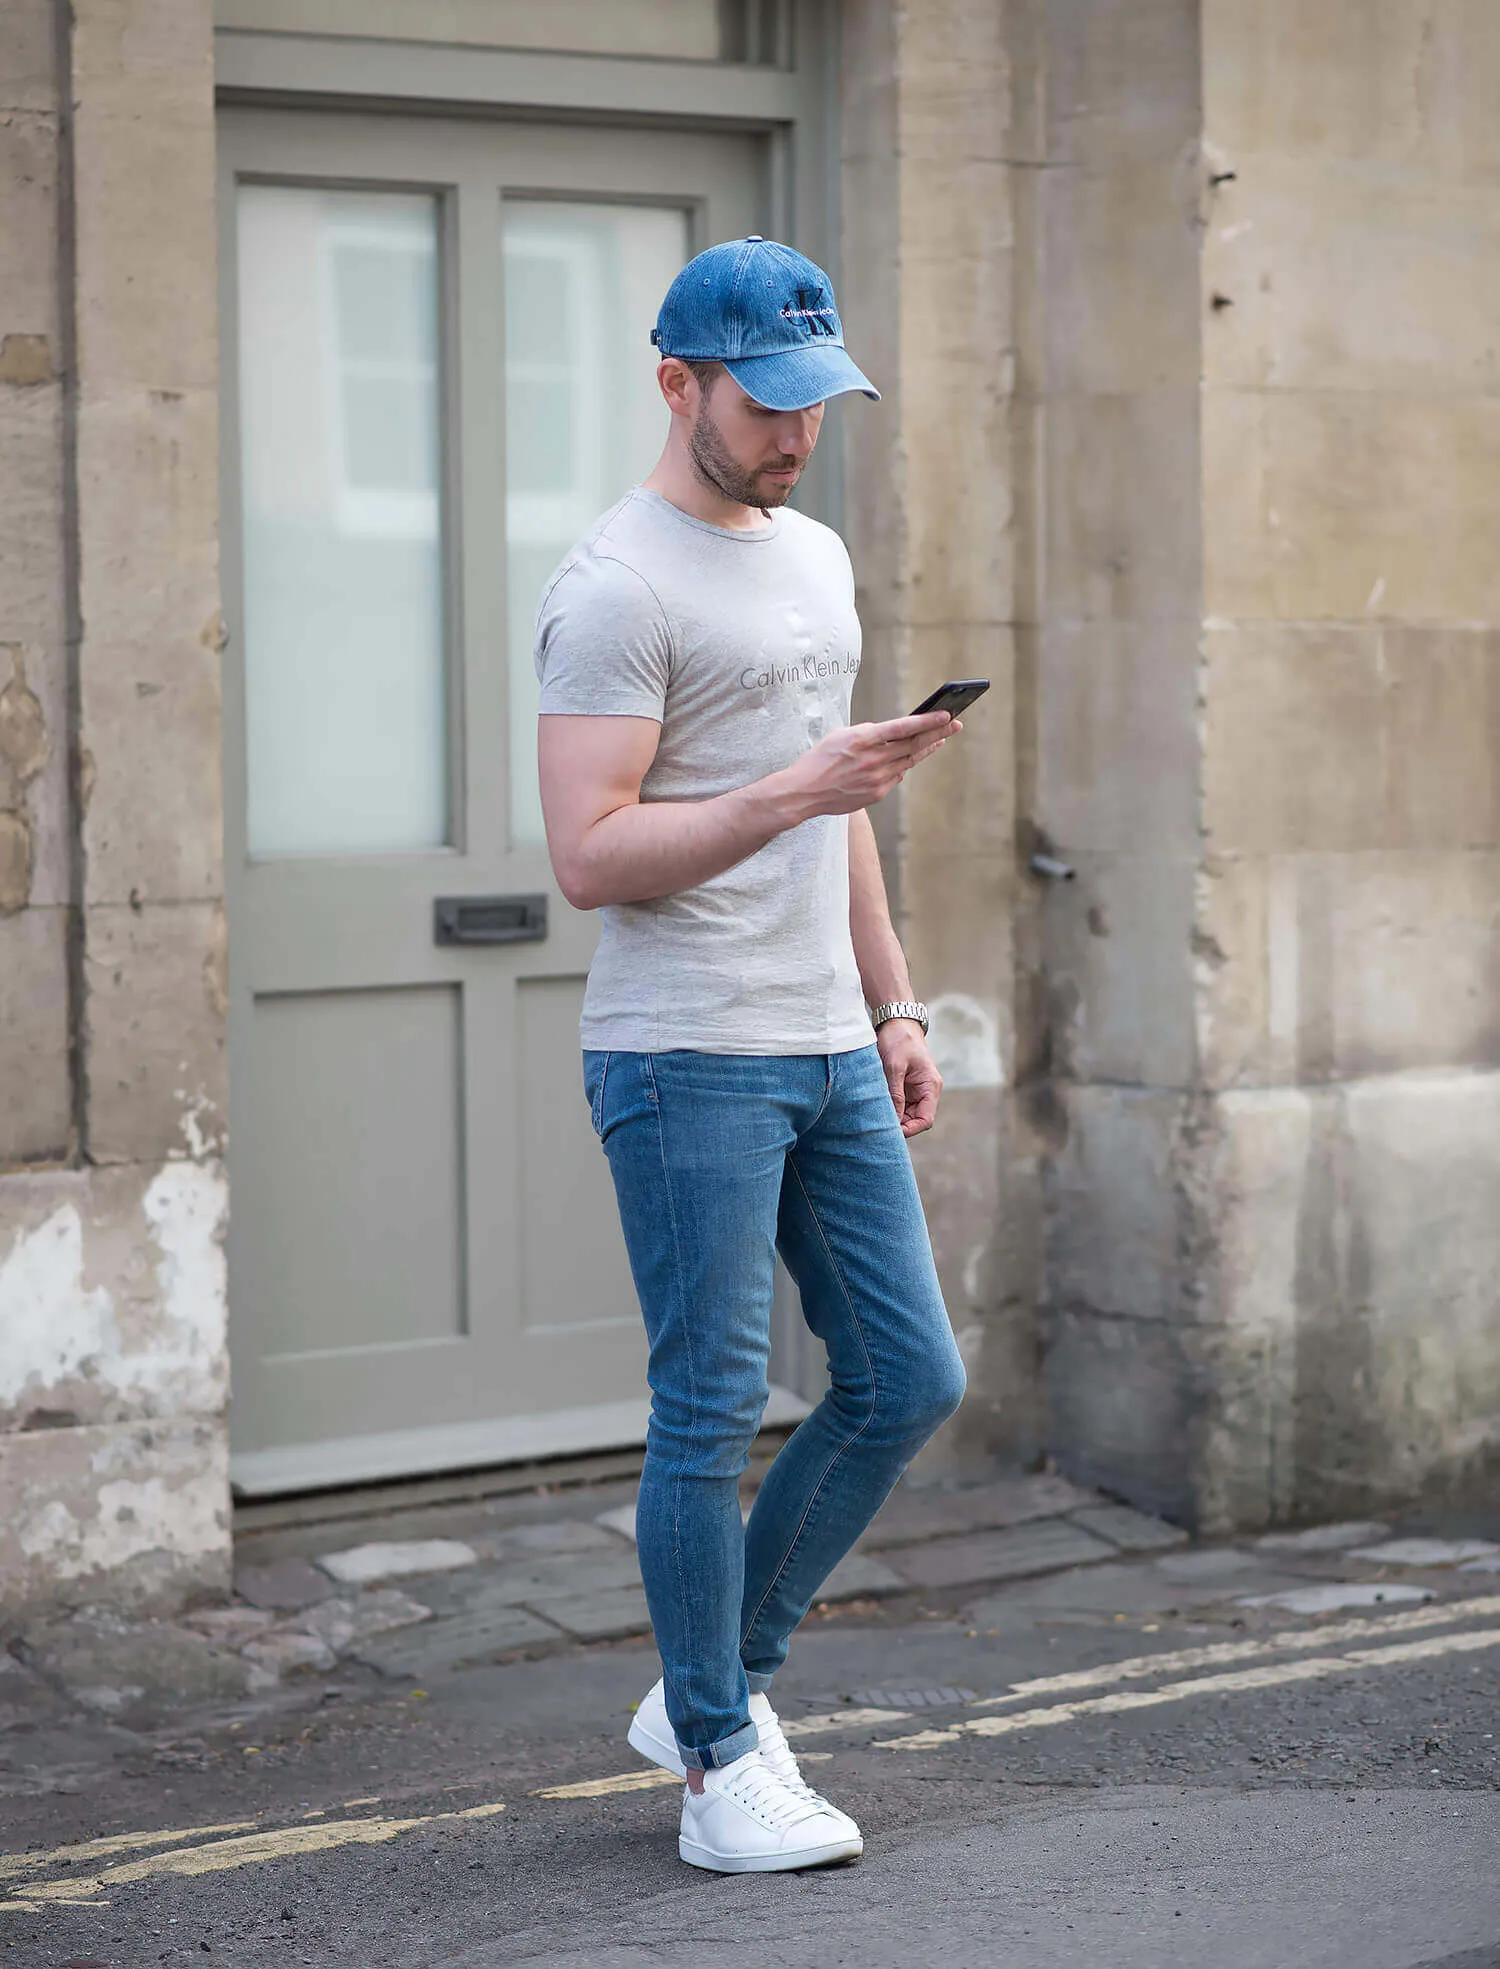 Pairing jeans with a T shirt and trucker hat